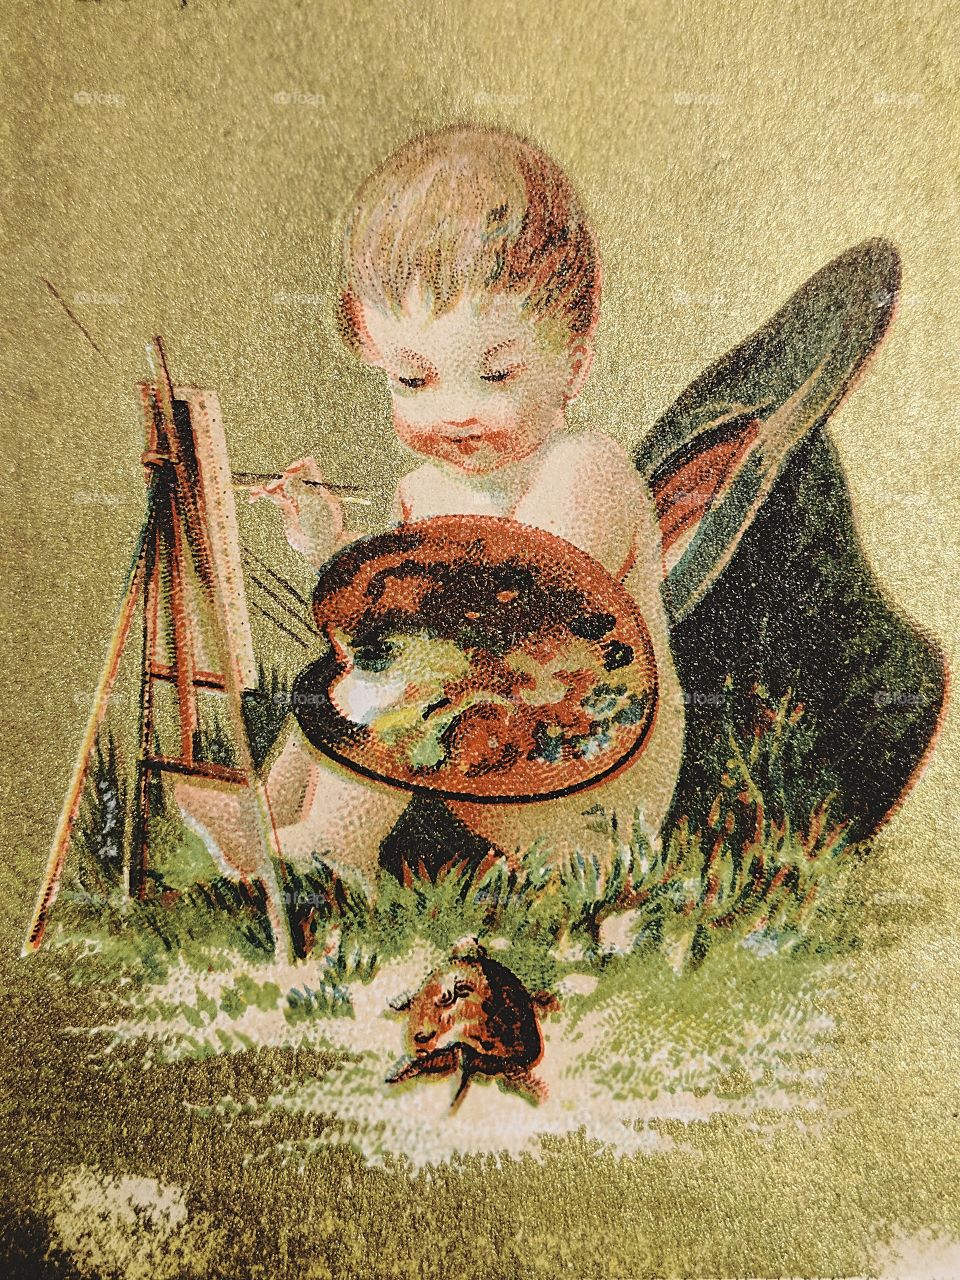 Victorian trade cards with baby looking at a turtle while painting in front of a big hat.